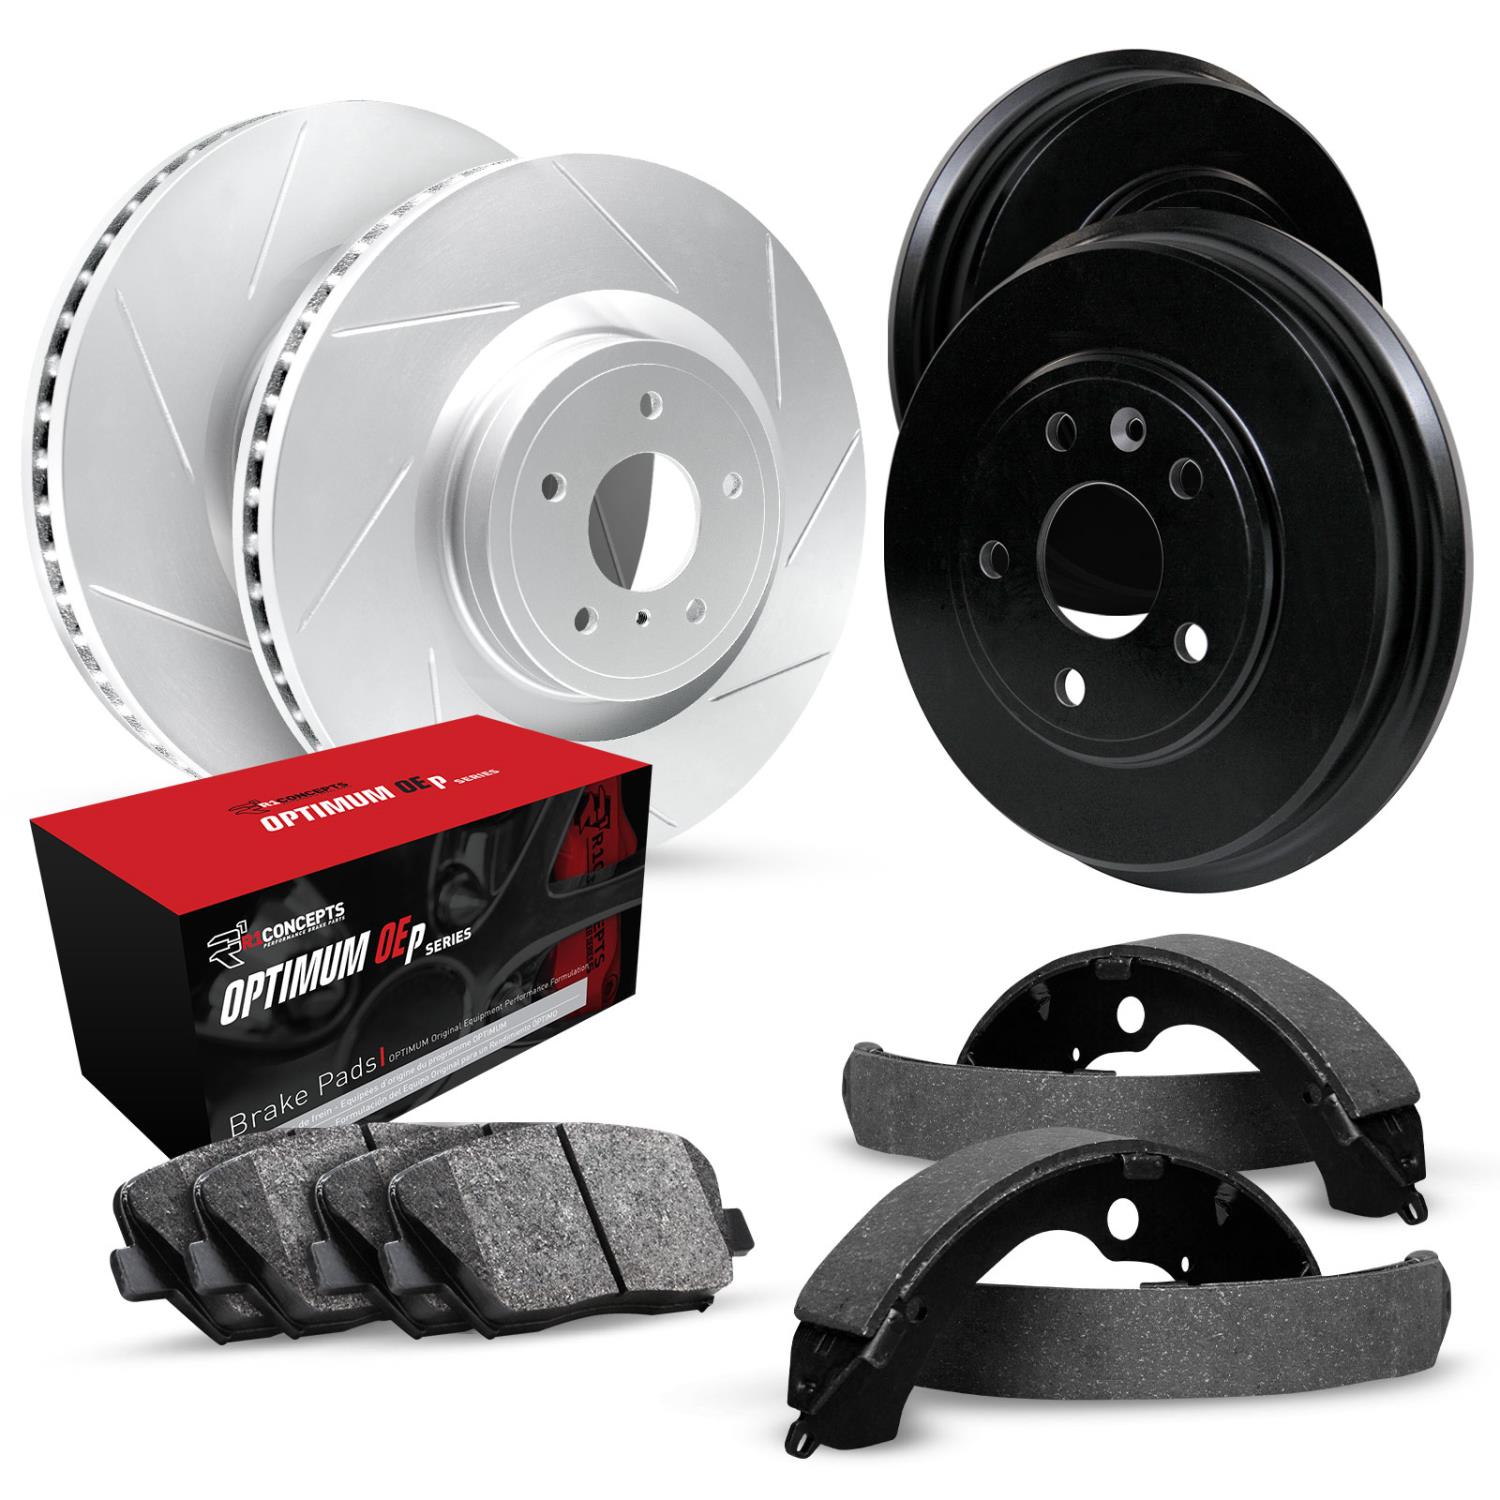 GEO-Carbon Slotted Brake Rotor & Drum Set w/Optimum OE Pads & Shoes, 1987-1988 GM, Position: Front & Rear